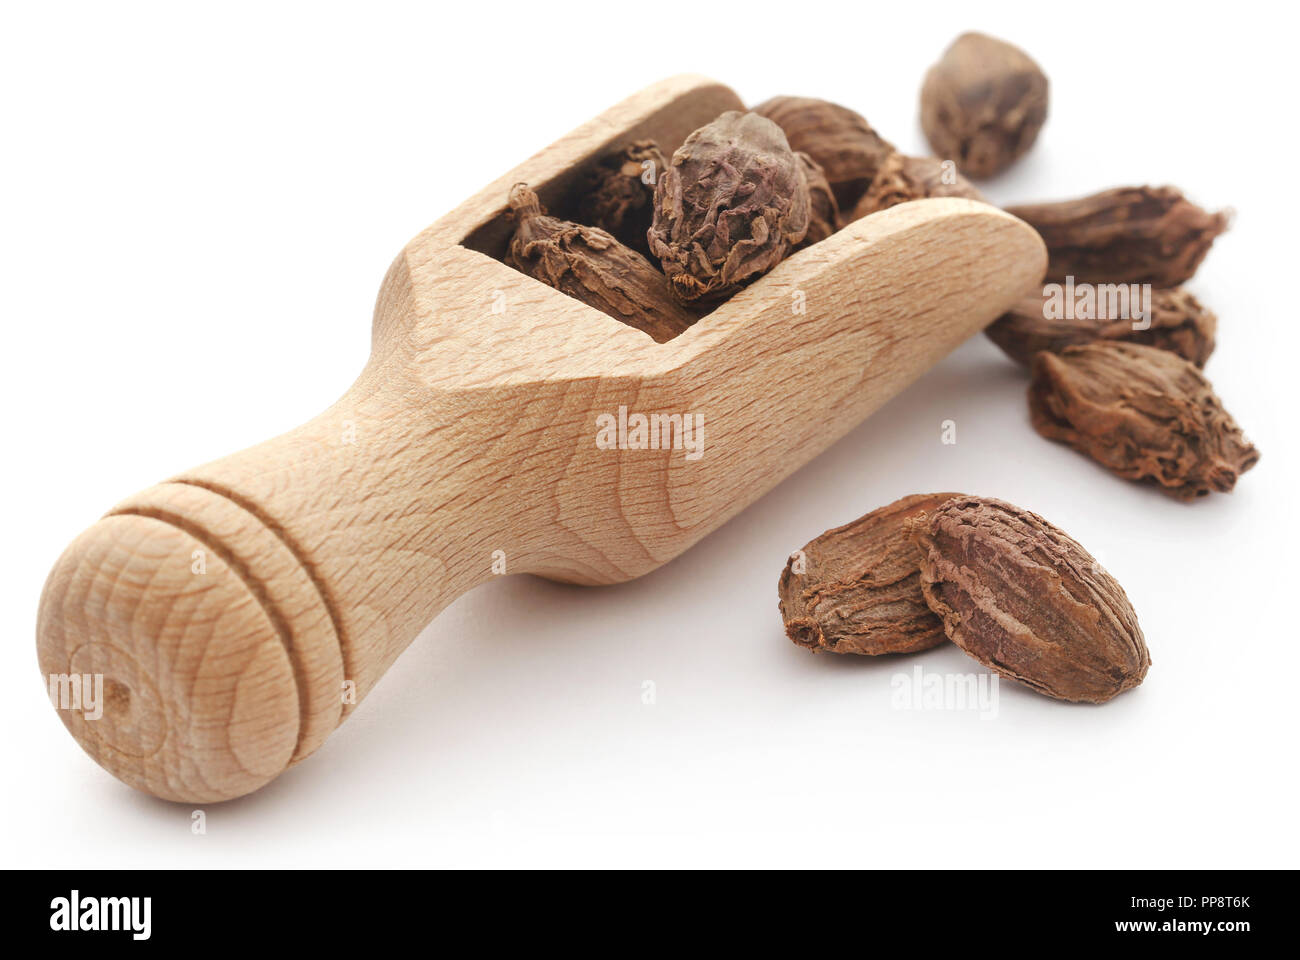 Black cardamom in a wooden scoop over white background Stock Photo